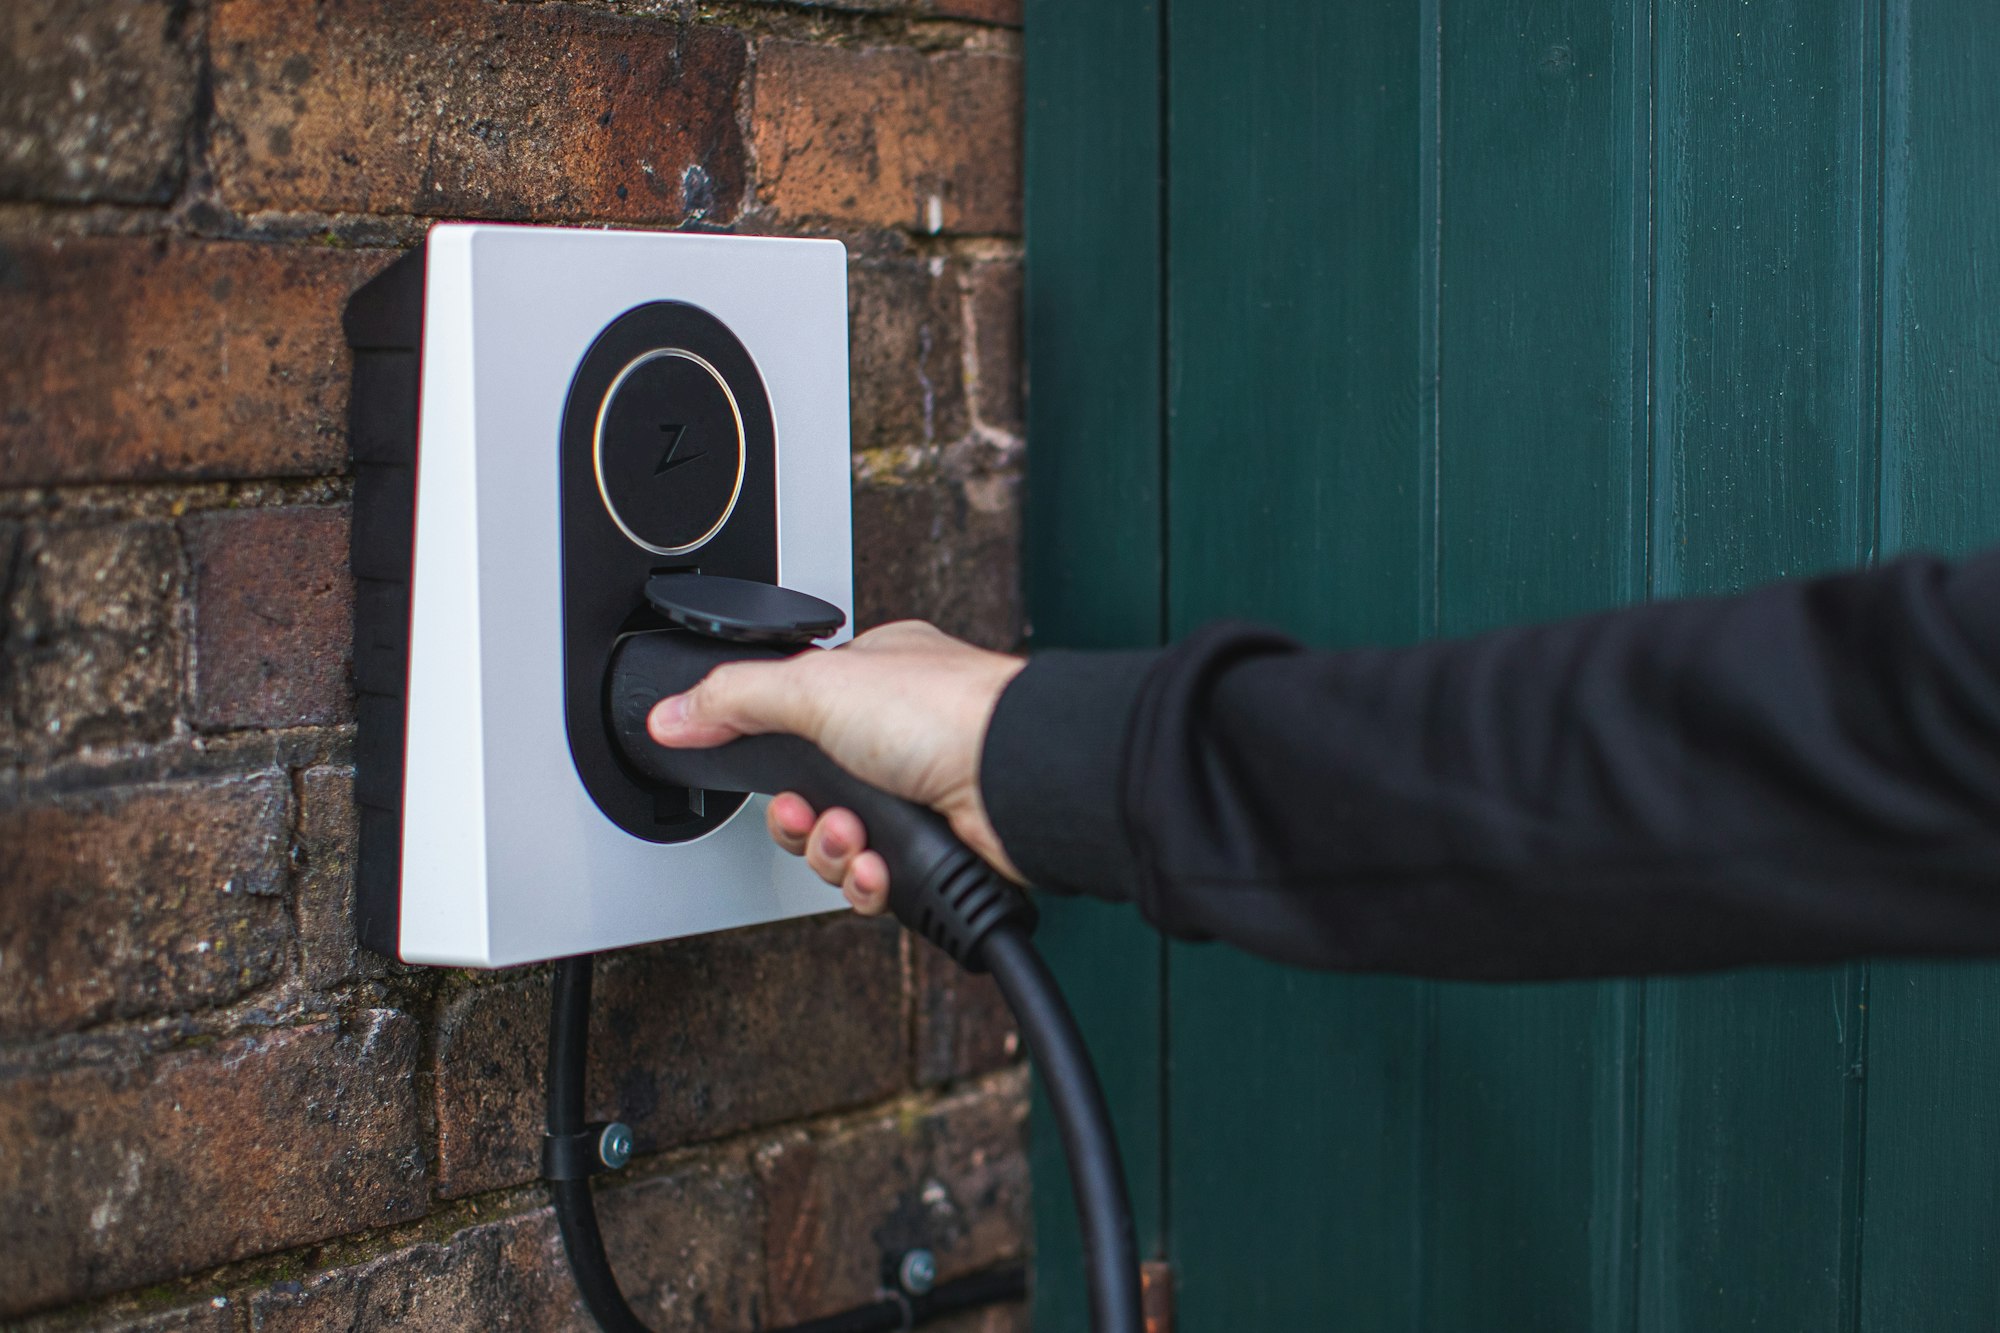 Owner taking out plug from an electric car charger mounted on wall